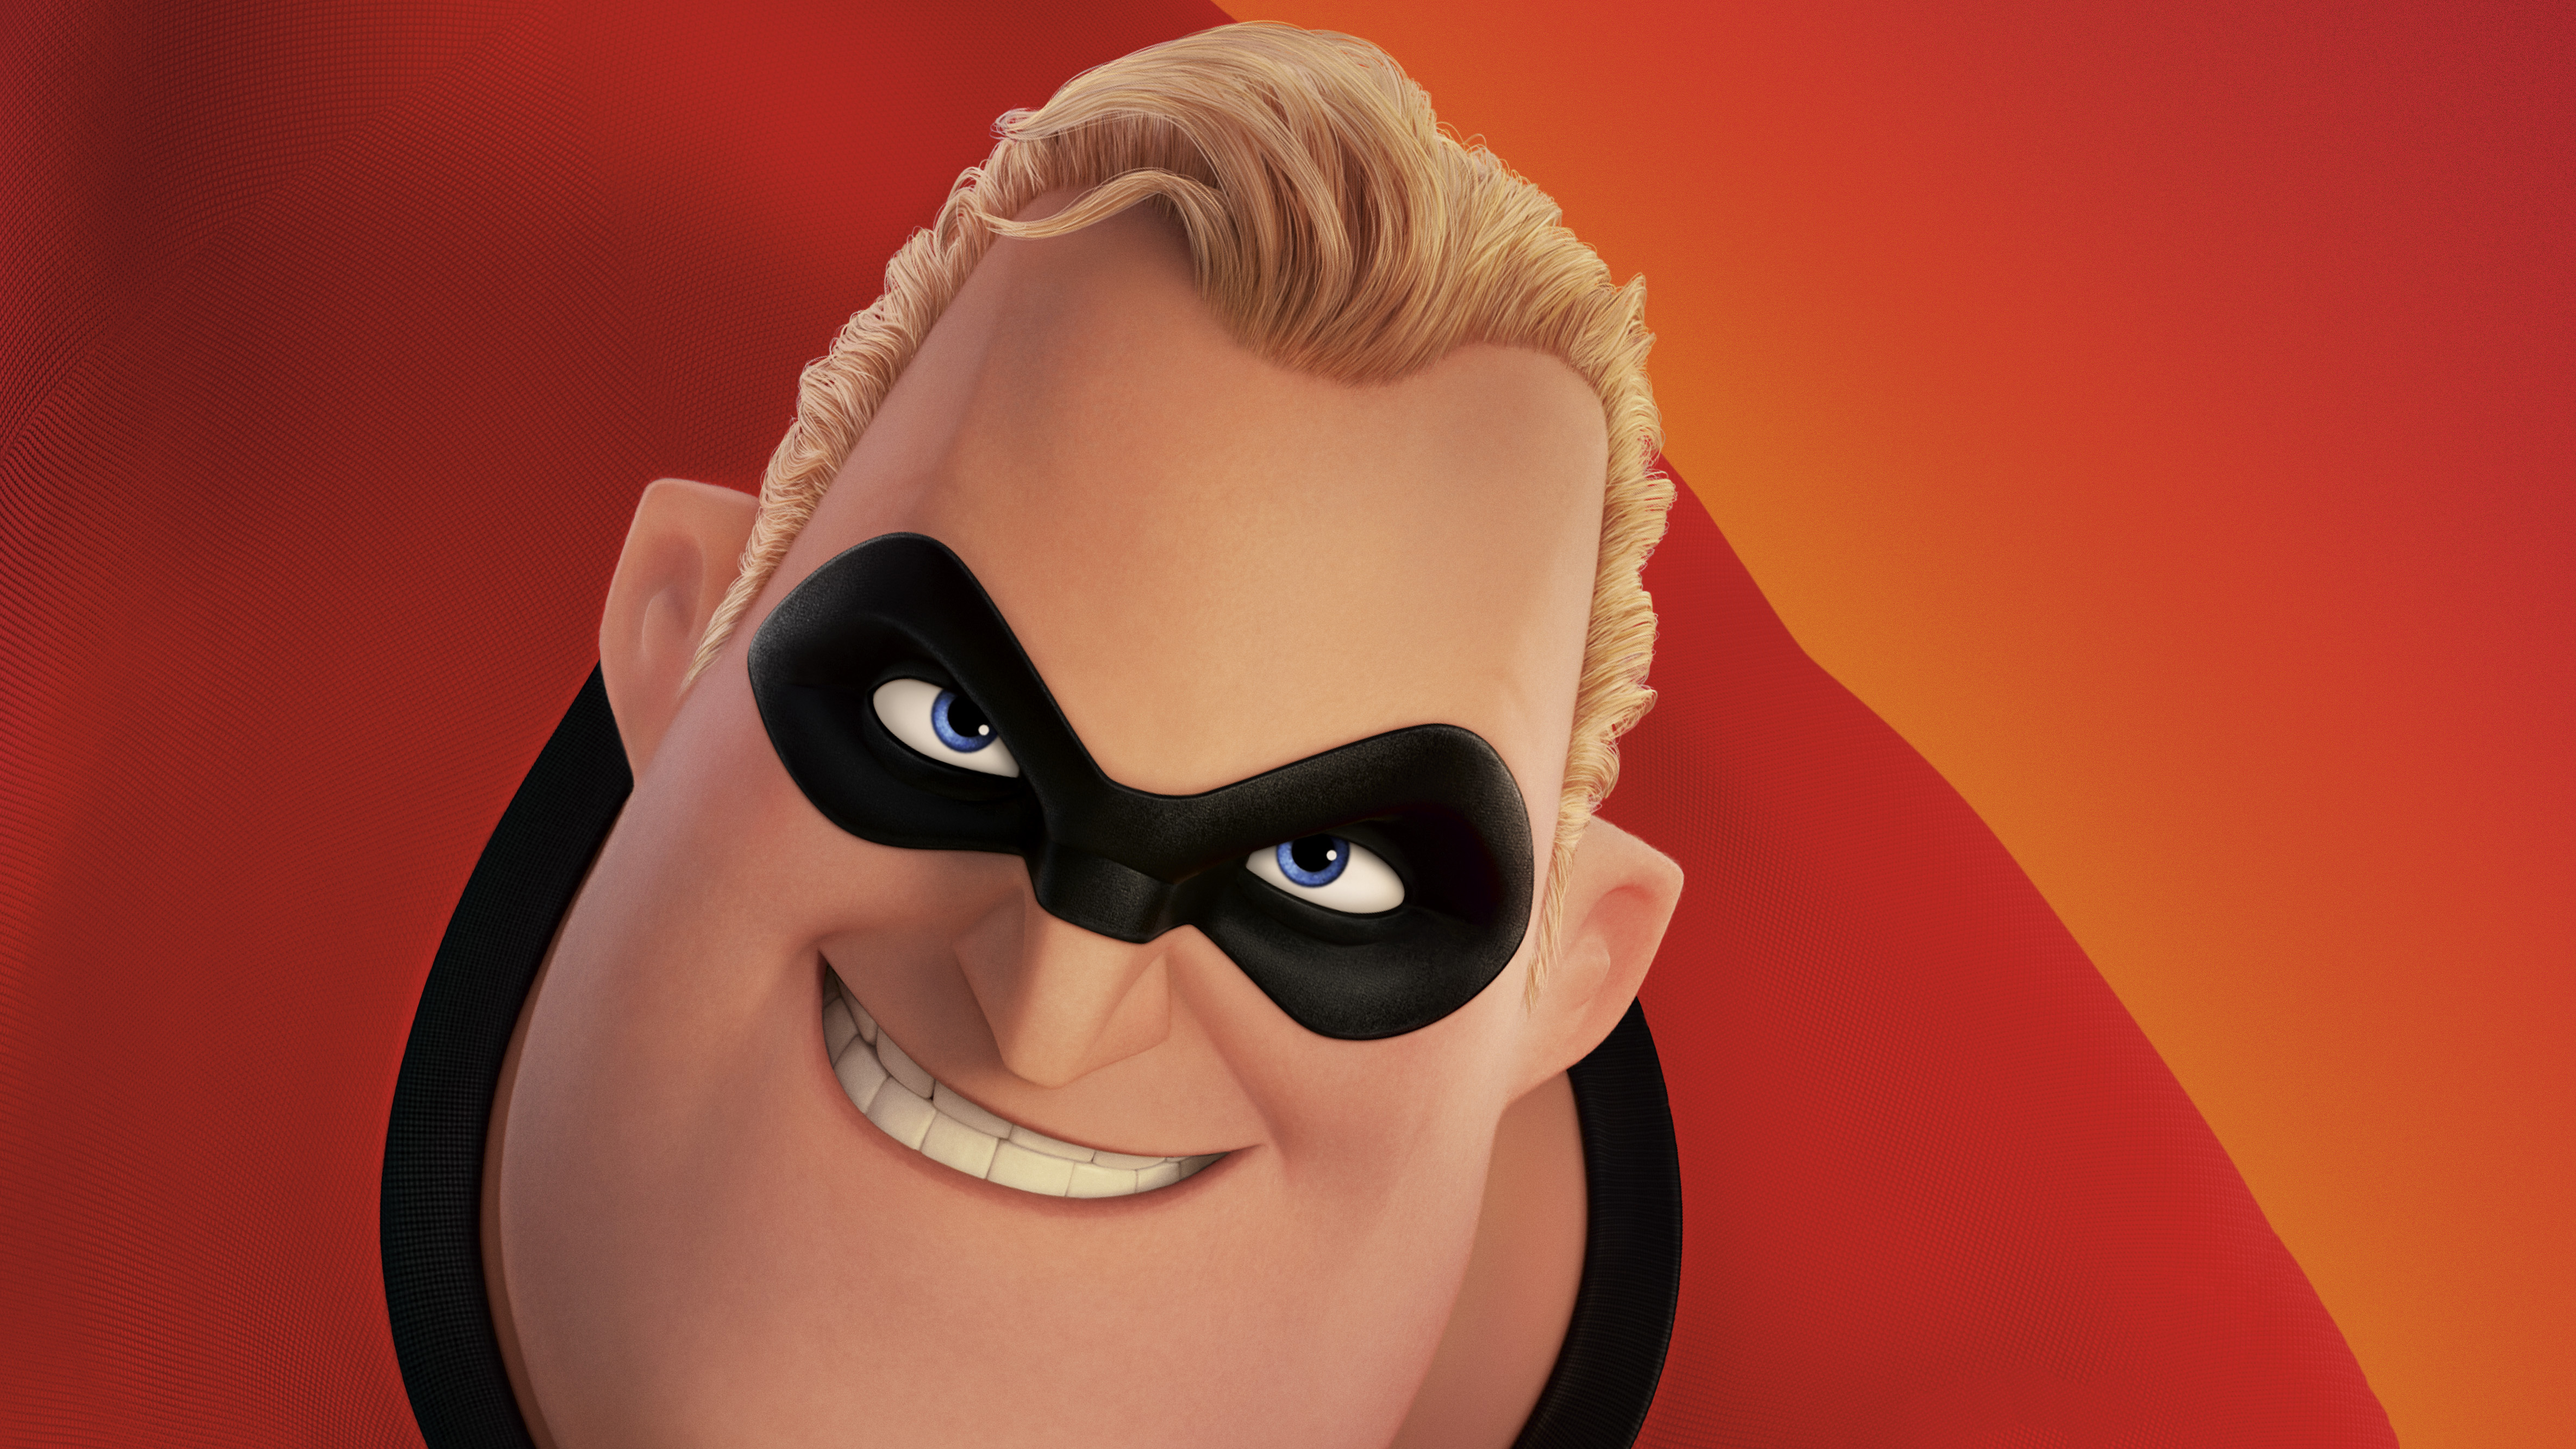 Mr Incredible In The Incredibles 2 5k, HD Movies, 4k Wallpapers, Images,  Backgrounds, Photos and Pictures